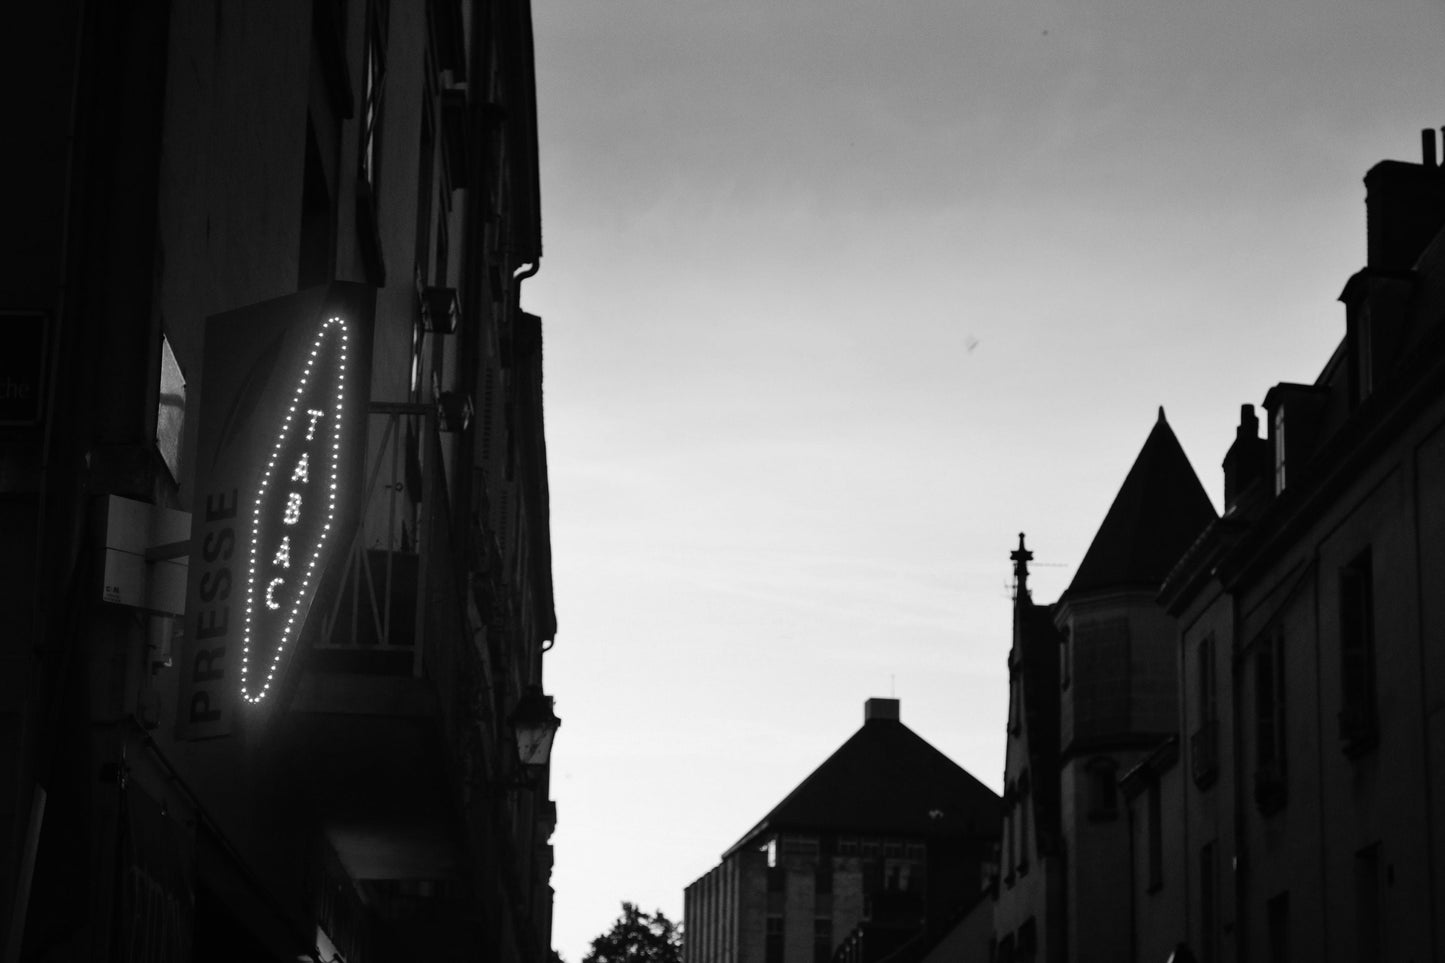 Tours France Black And White Street Photography Print